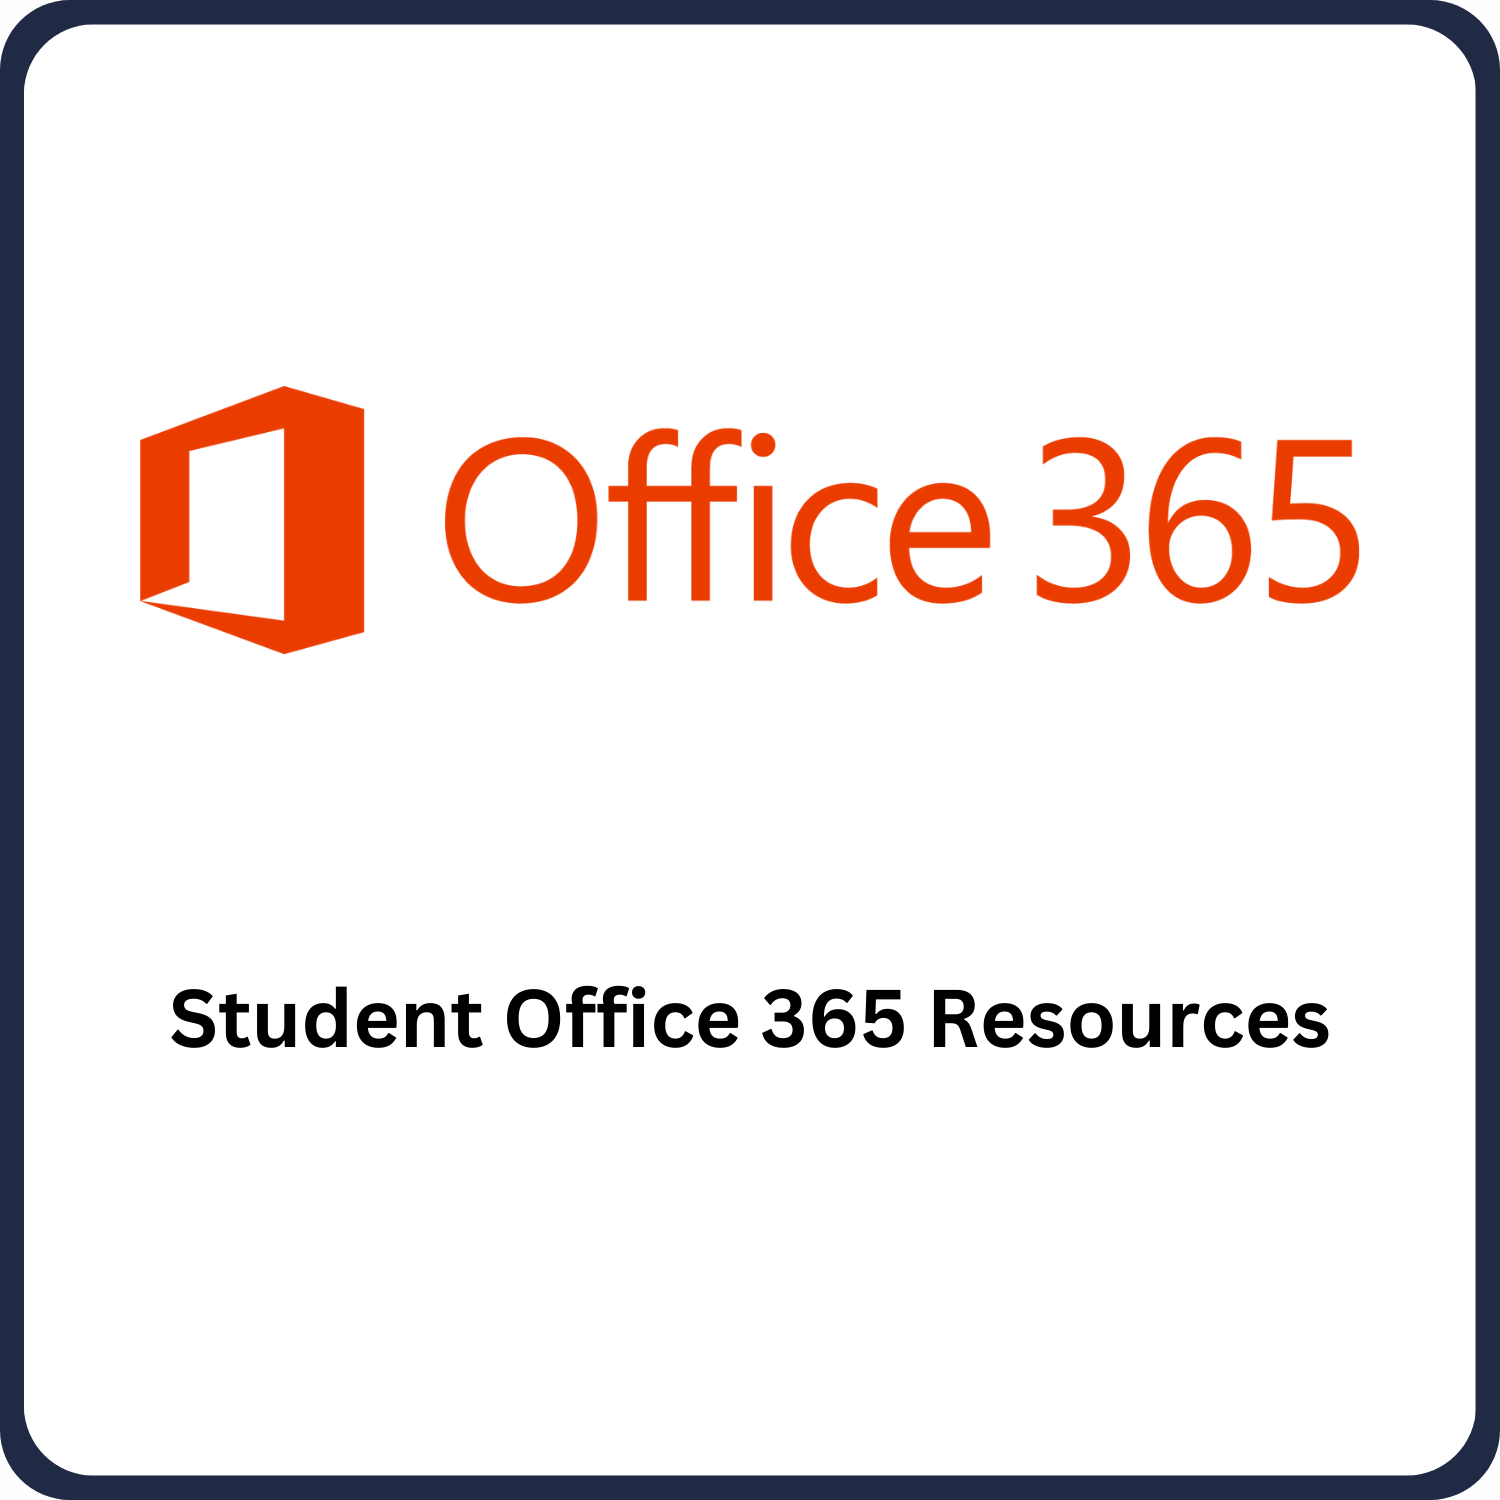 Student Office 365 Resources